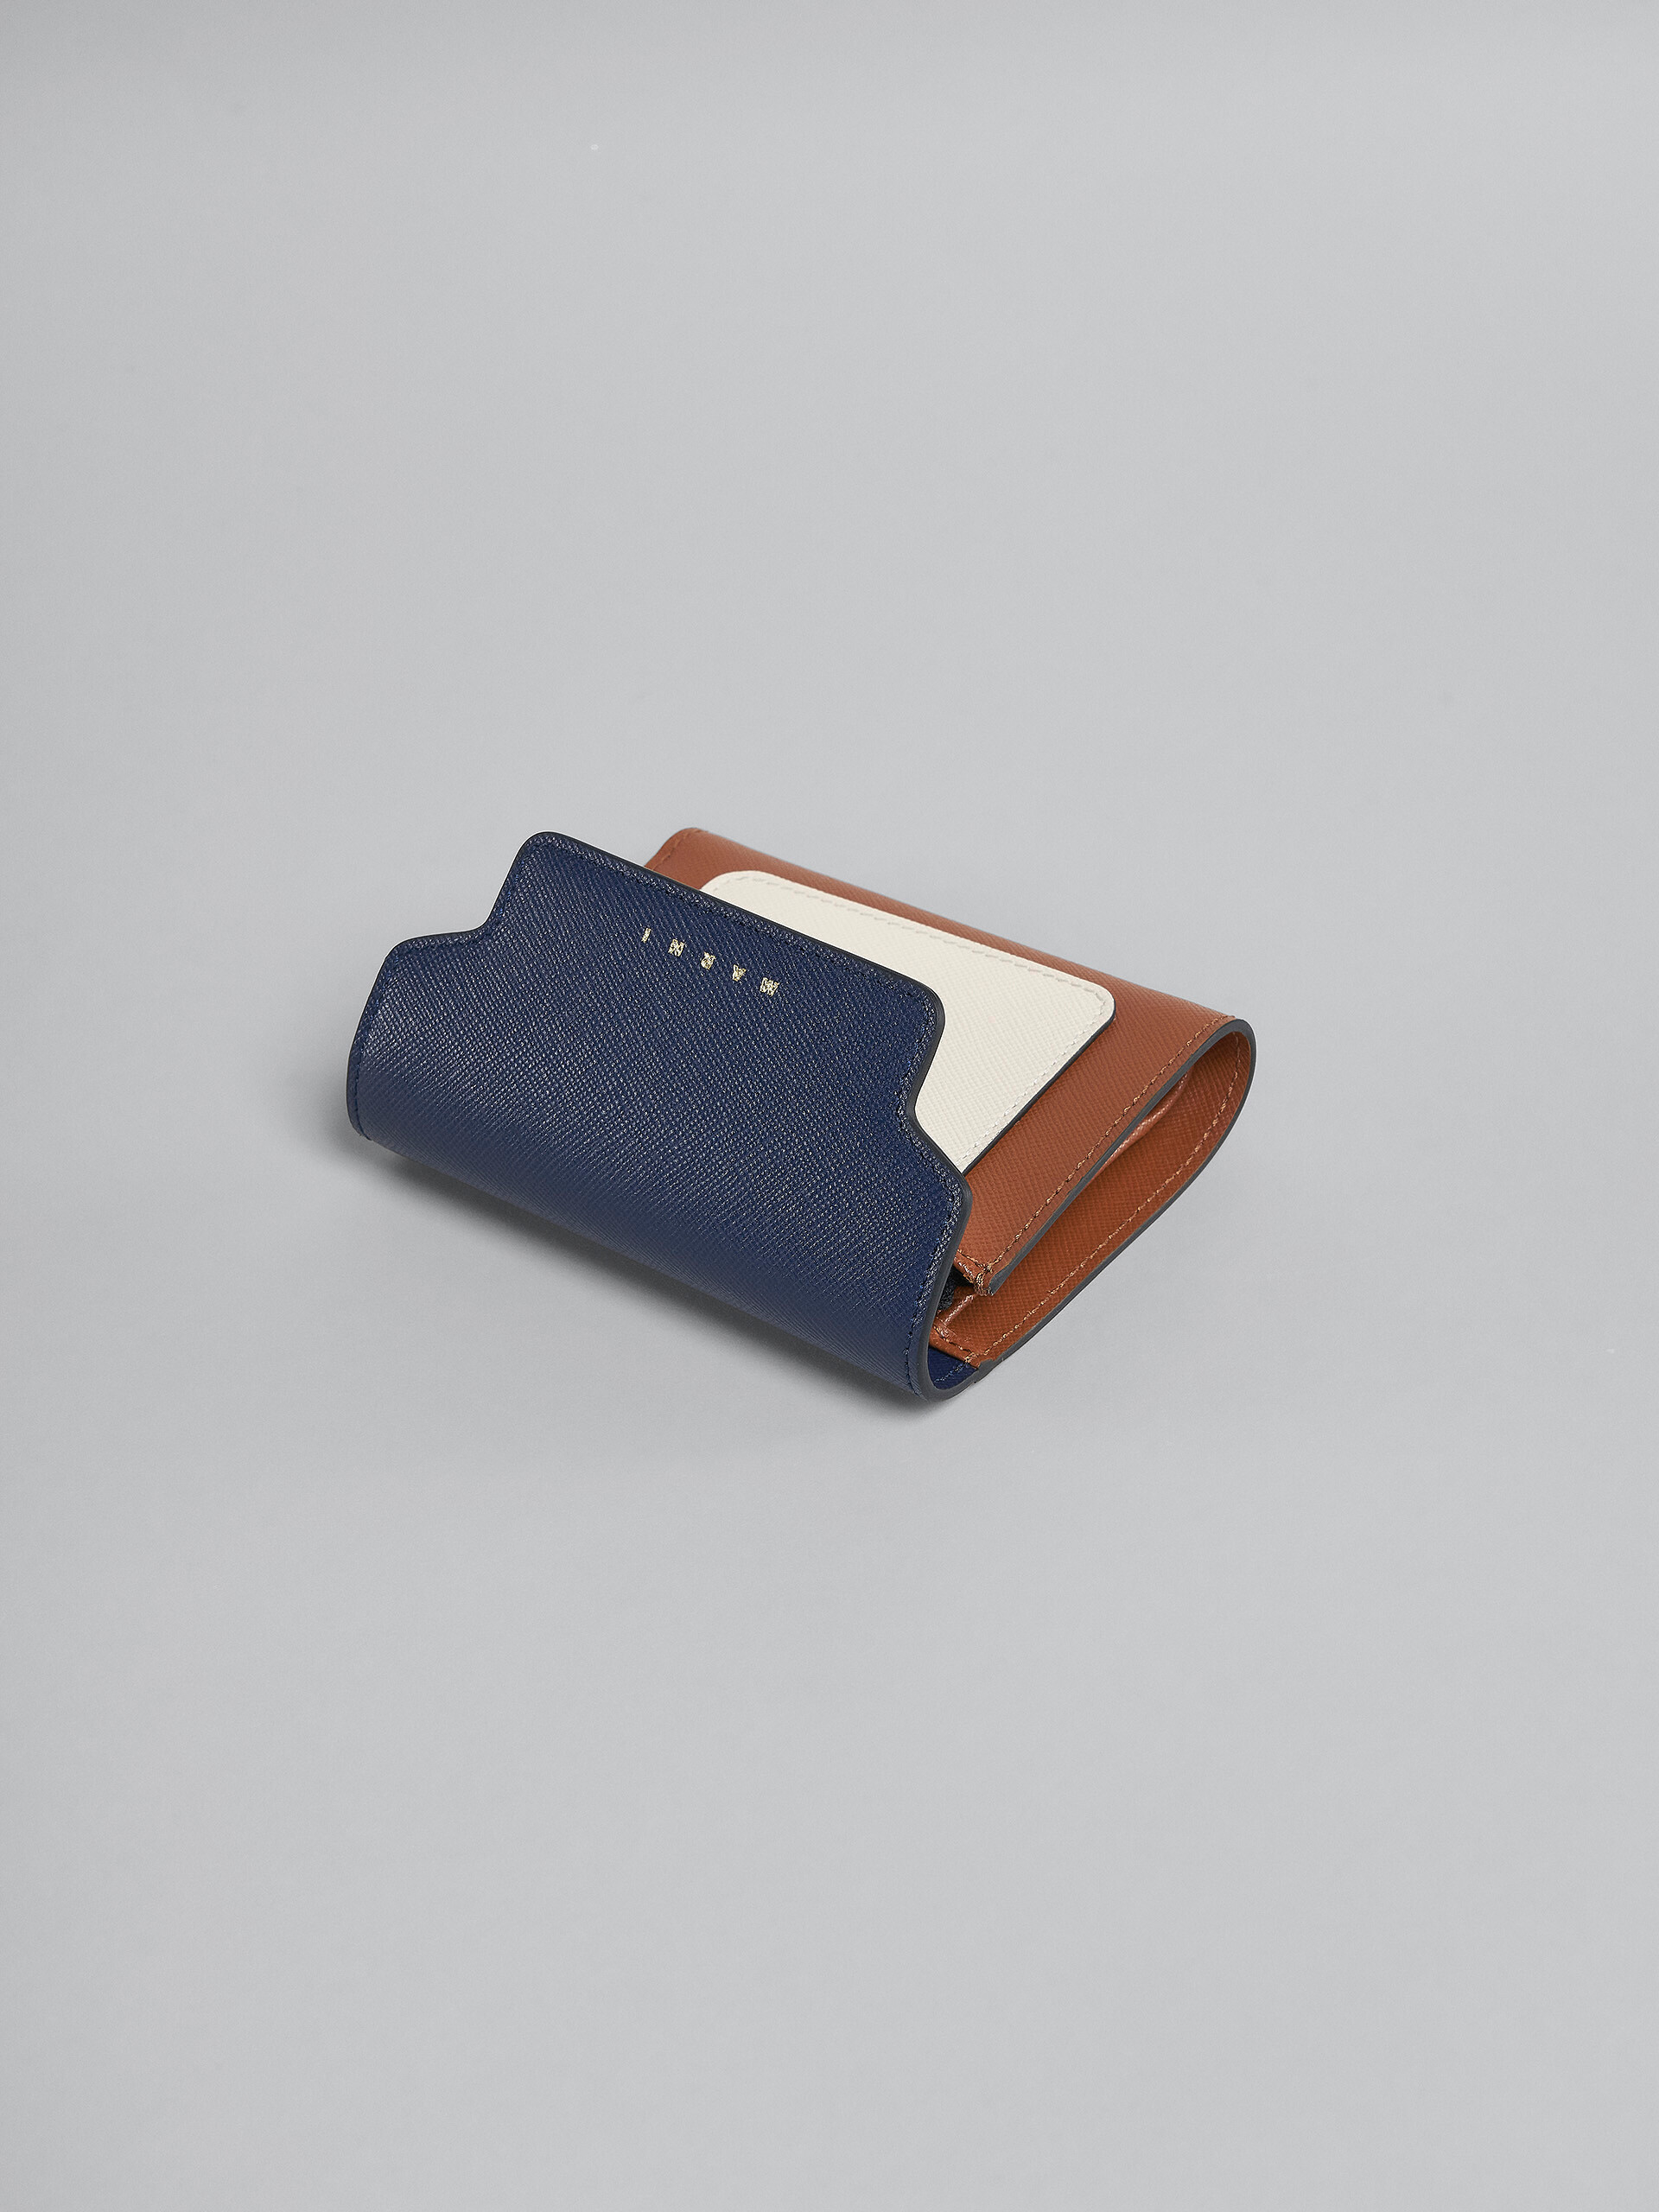 Blue white and brown saffiano leather tri-fold wallet - Wallets - Image 4